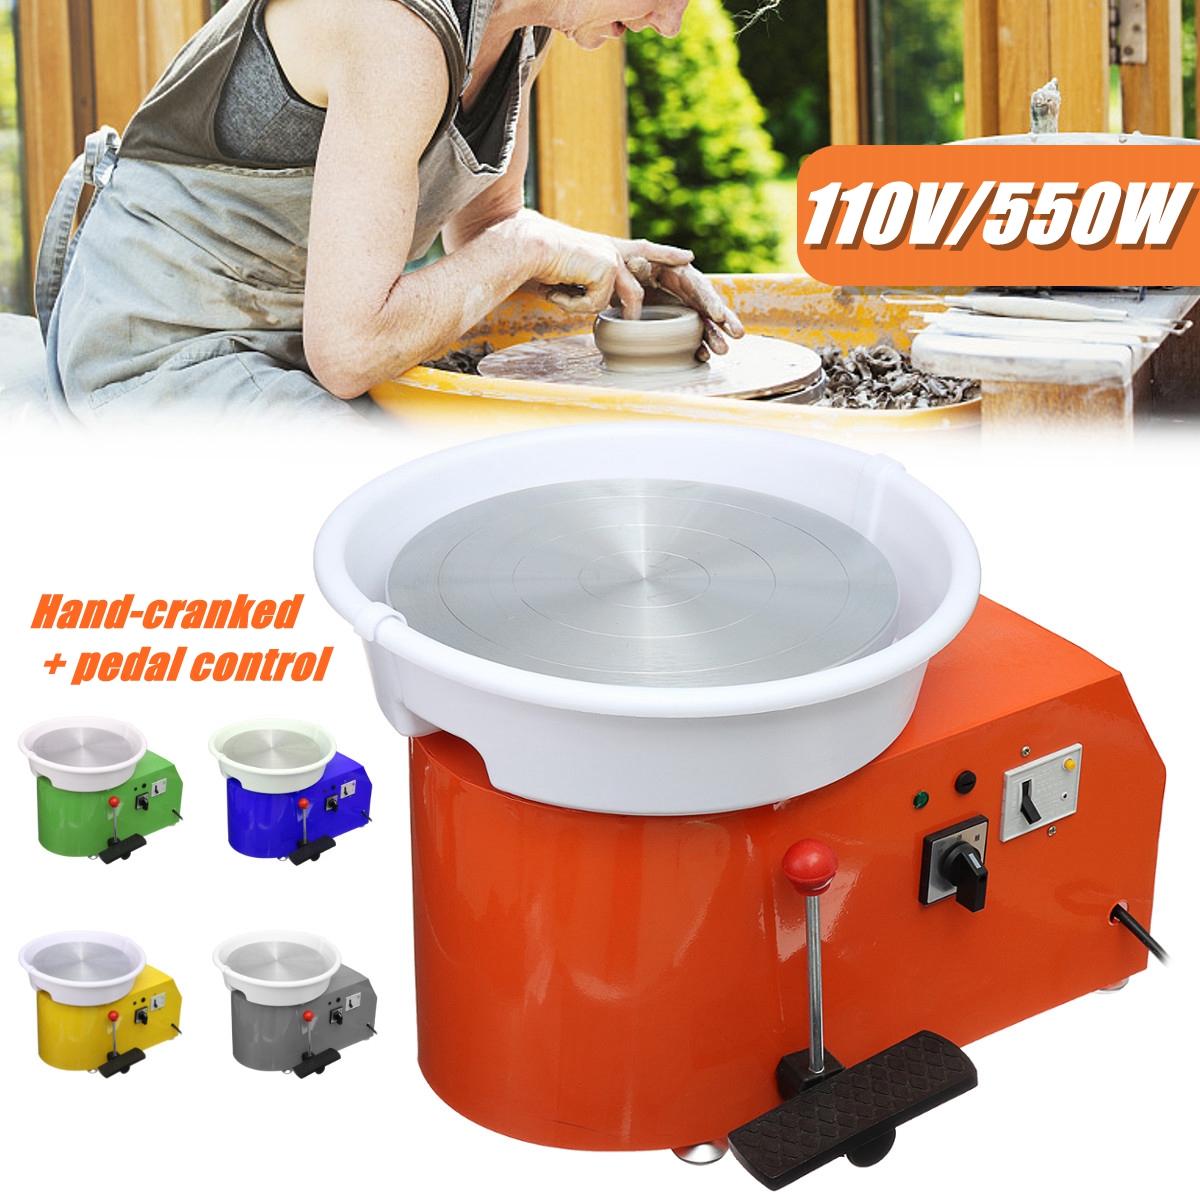 2-in-1-110V-550W-32CM-Electric-Pottery-Wheel-Machine-For-Ceramic-Work-Clay-Art-Craft-1407062-1